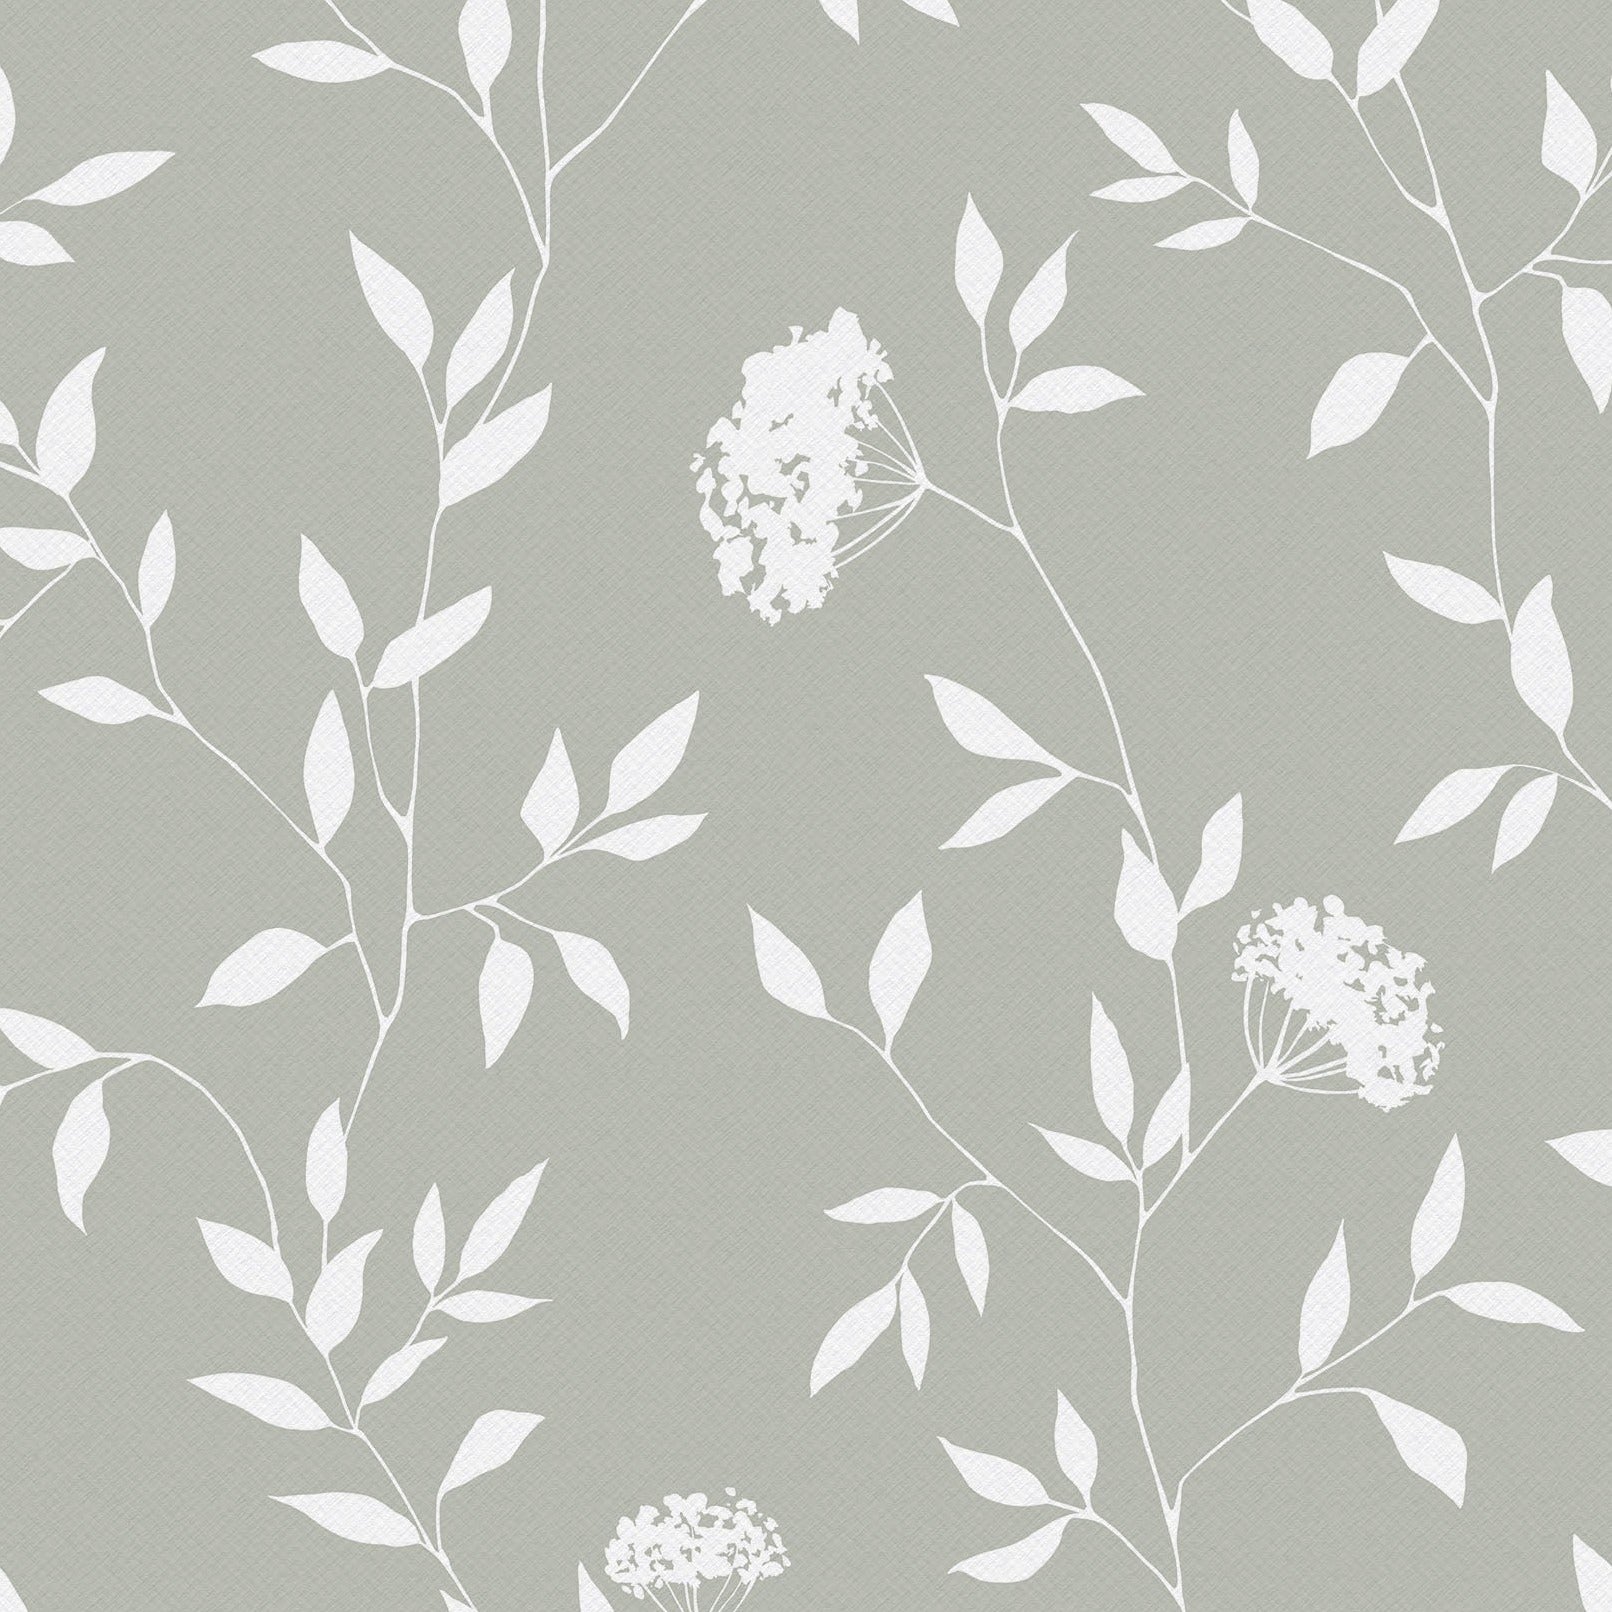 A close-up view of the Botanical Elegance Wallpaper-Olive, highlighting its design details. The wallpaper has a muted olive background with a matte finish, overlaid with white botanical illustrations. The design features slender branches interspersed with sparse leaves and occasional clusters of small, intricate flowers. This wallpaper adds a touch of nature-inspired sophistication to any room.